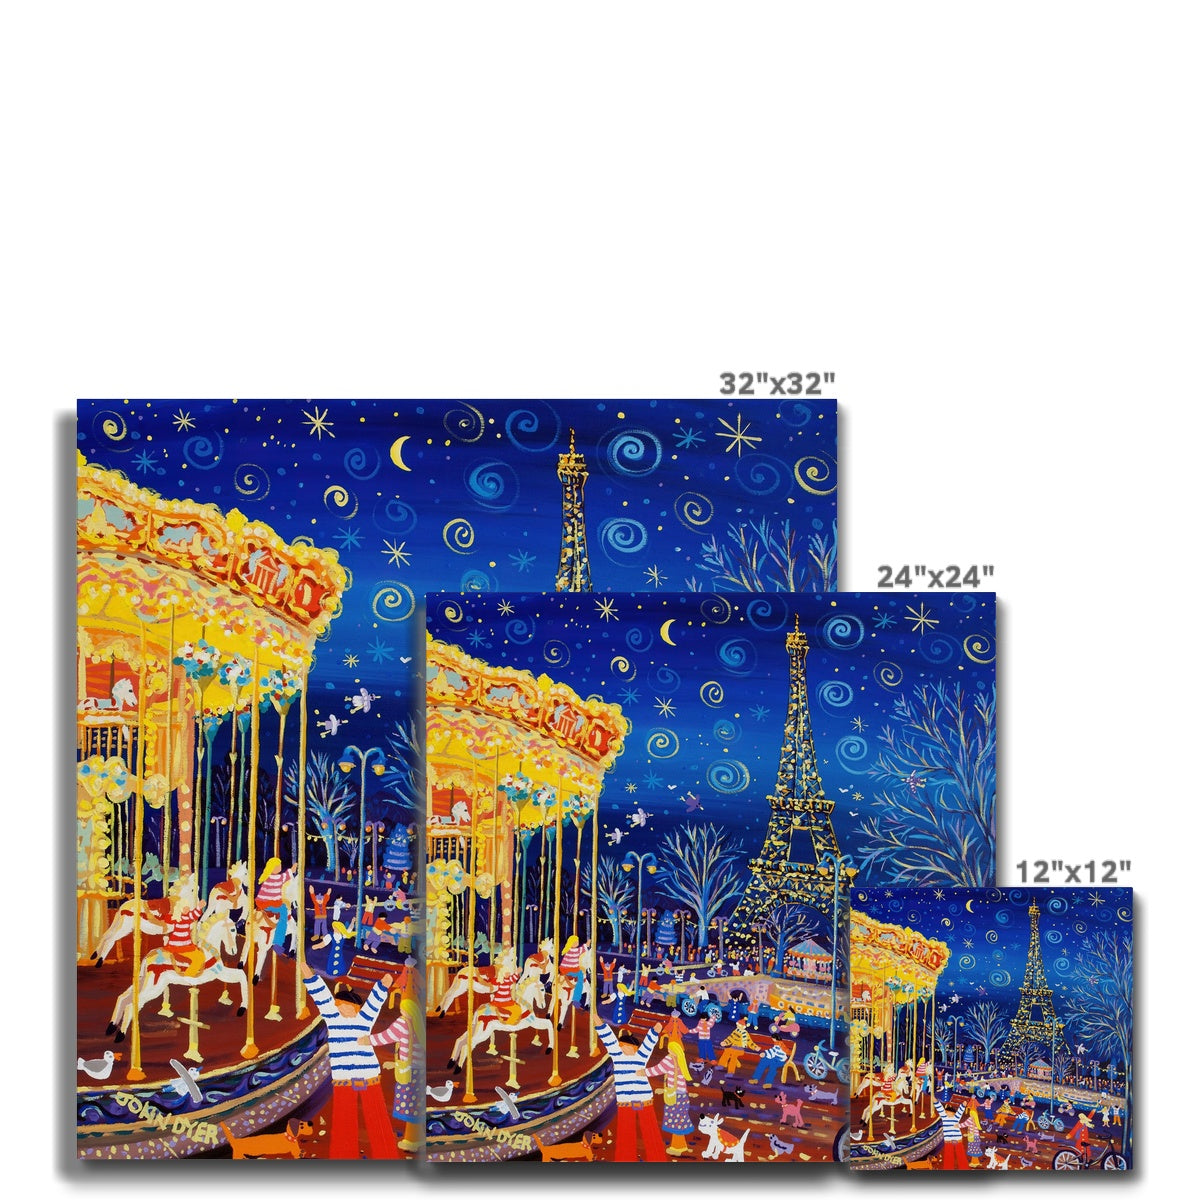 Twinkling Lights and Carousel Delights, Paris, Eiffel Tower. Canvas Art Print by John Dyer